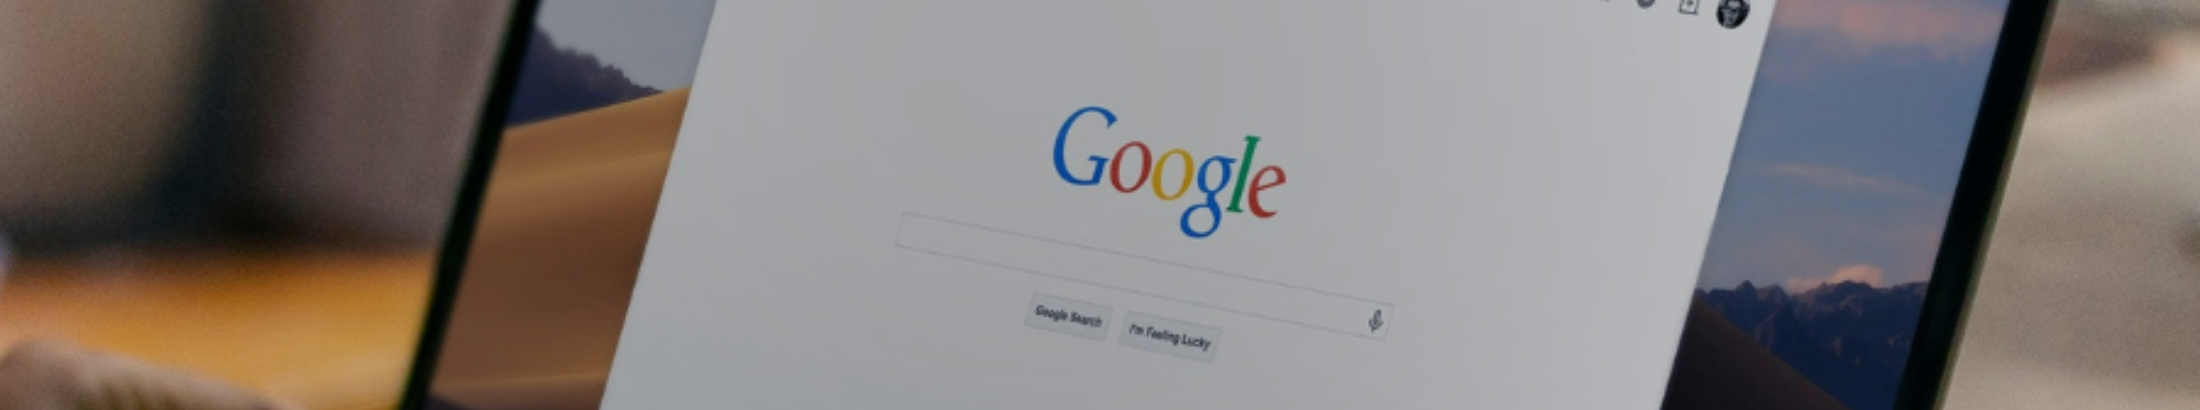 A picture of the Google search engine interface on a laptop